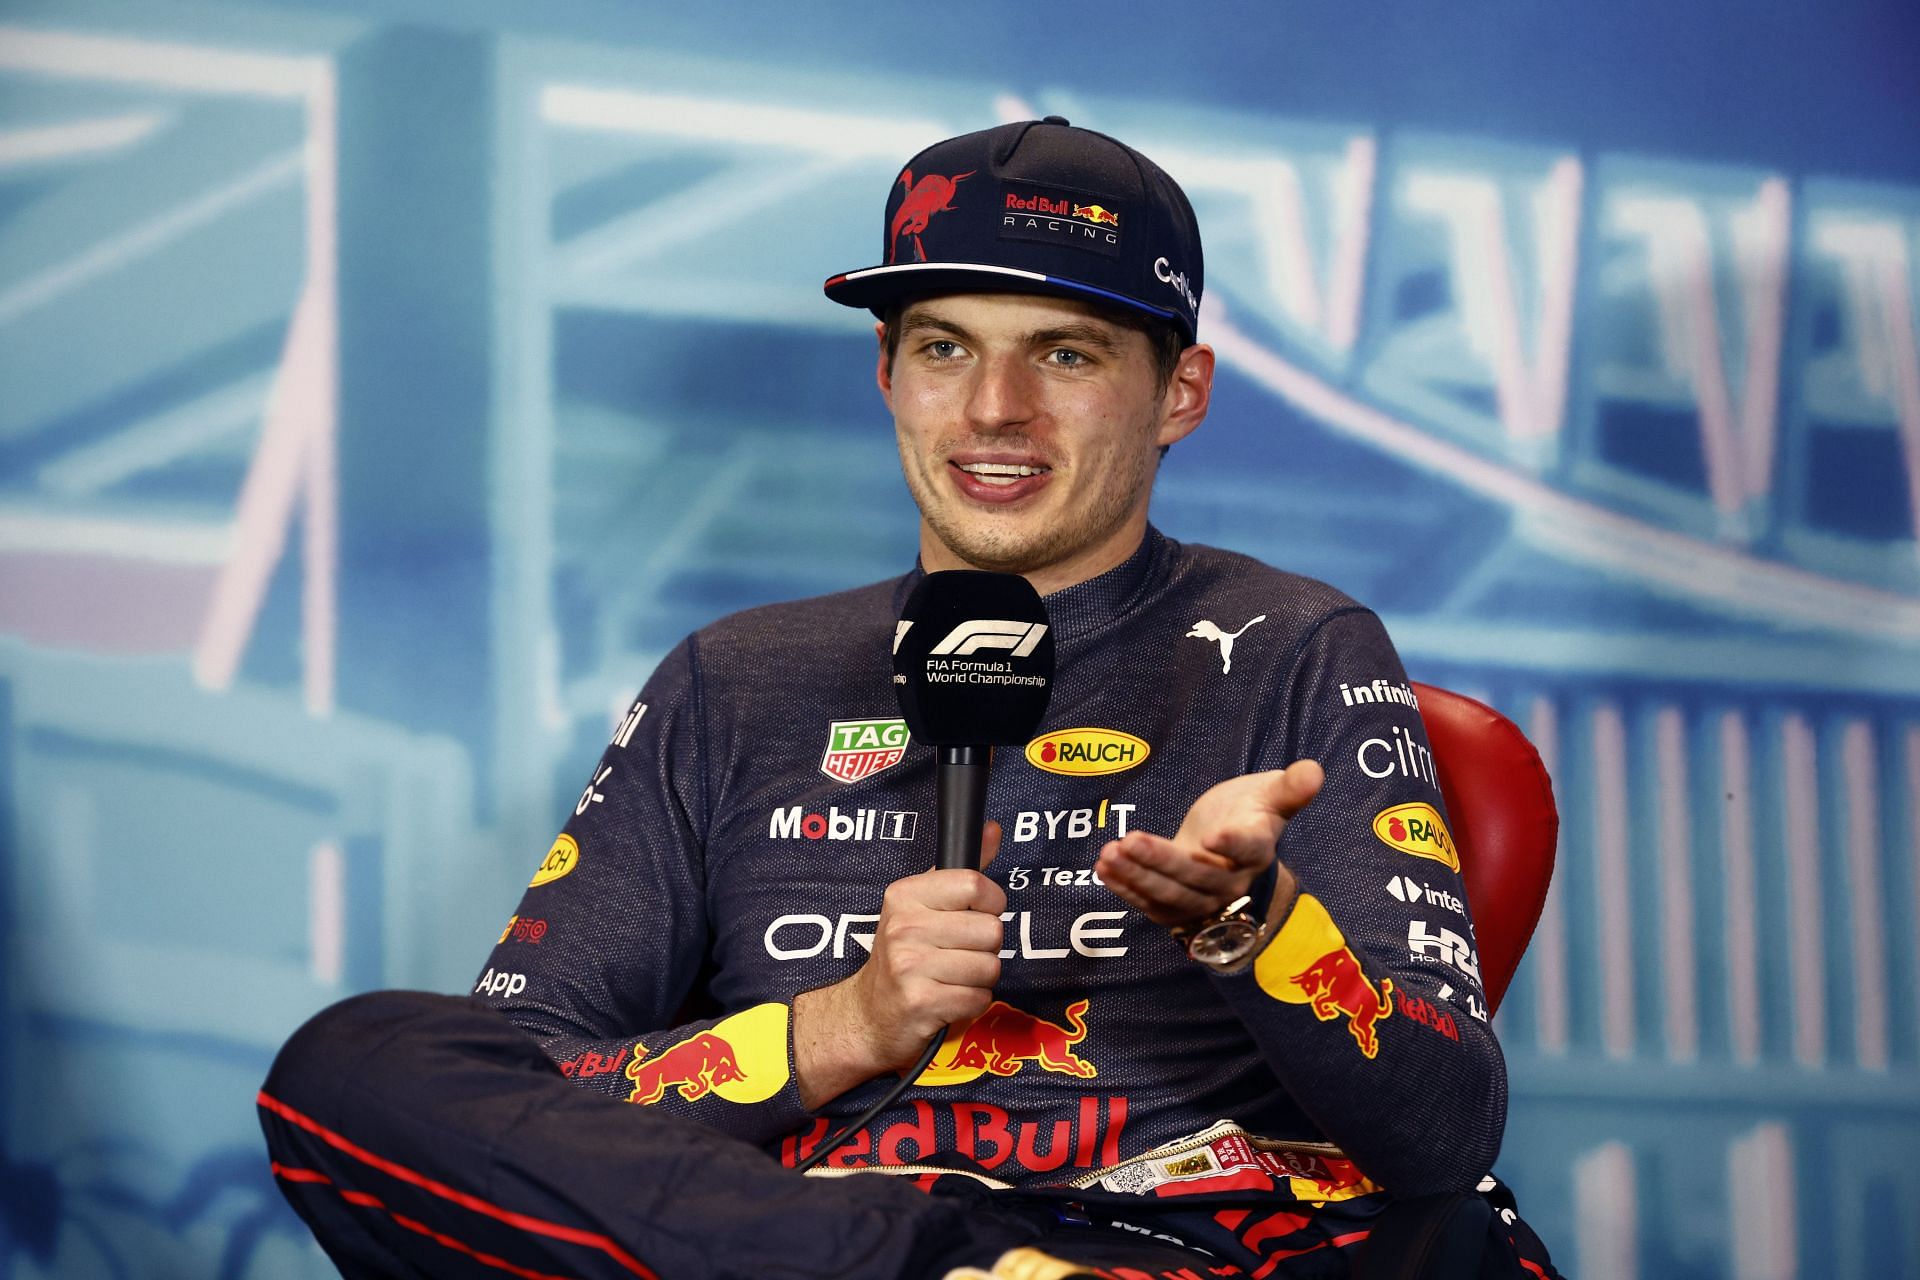 Max Verstappen says he is motitvated more than ever in 2022